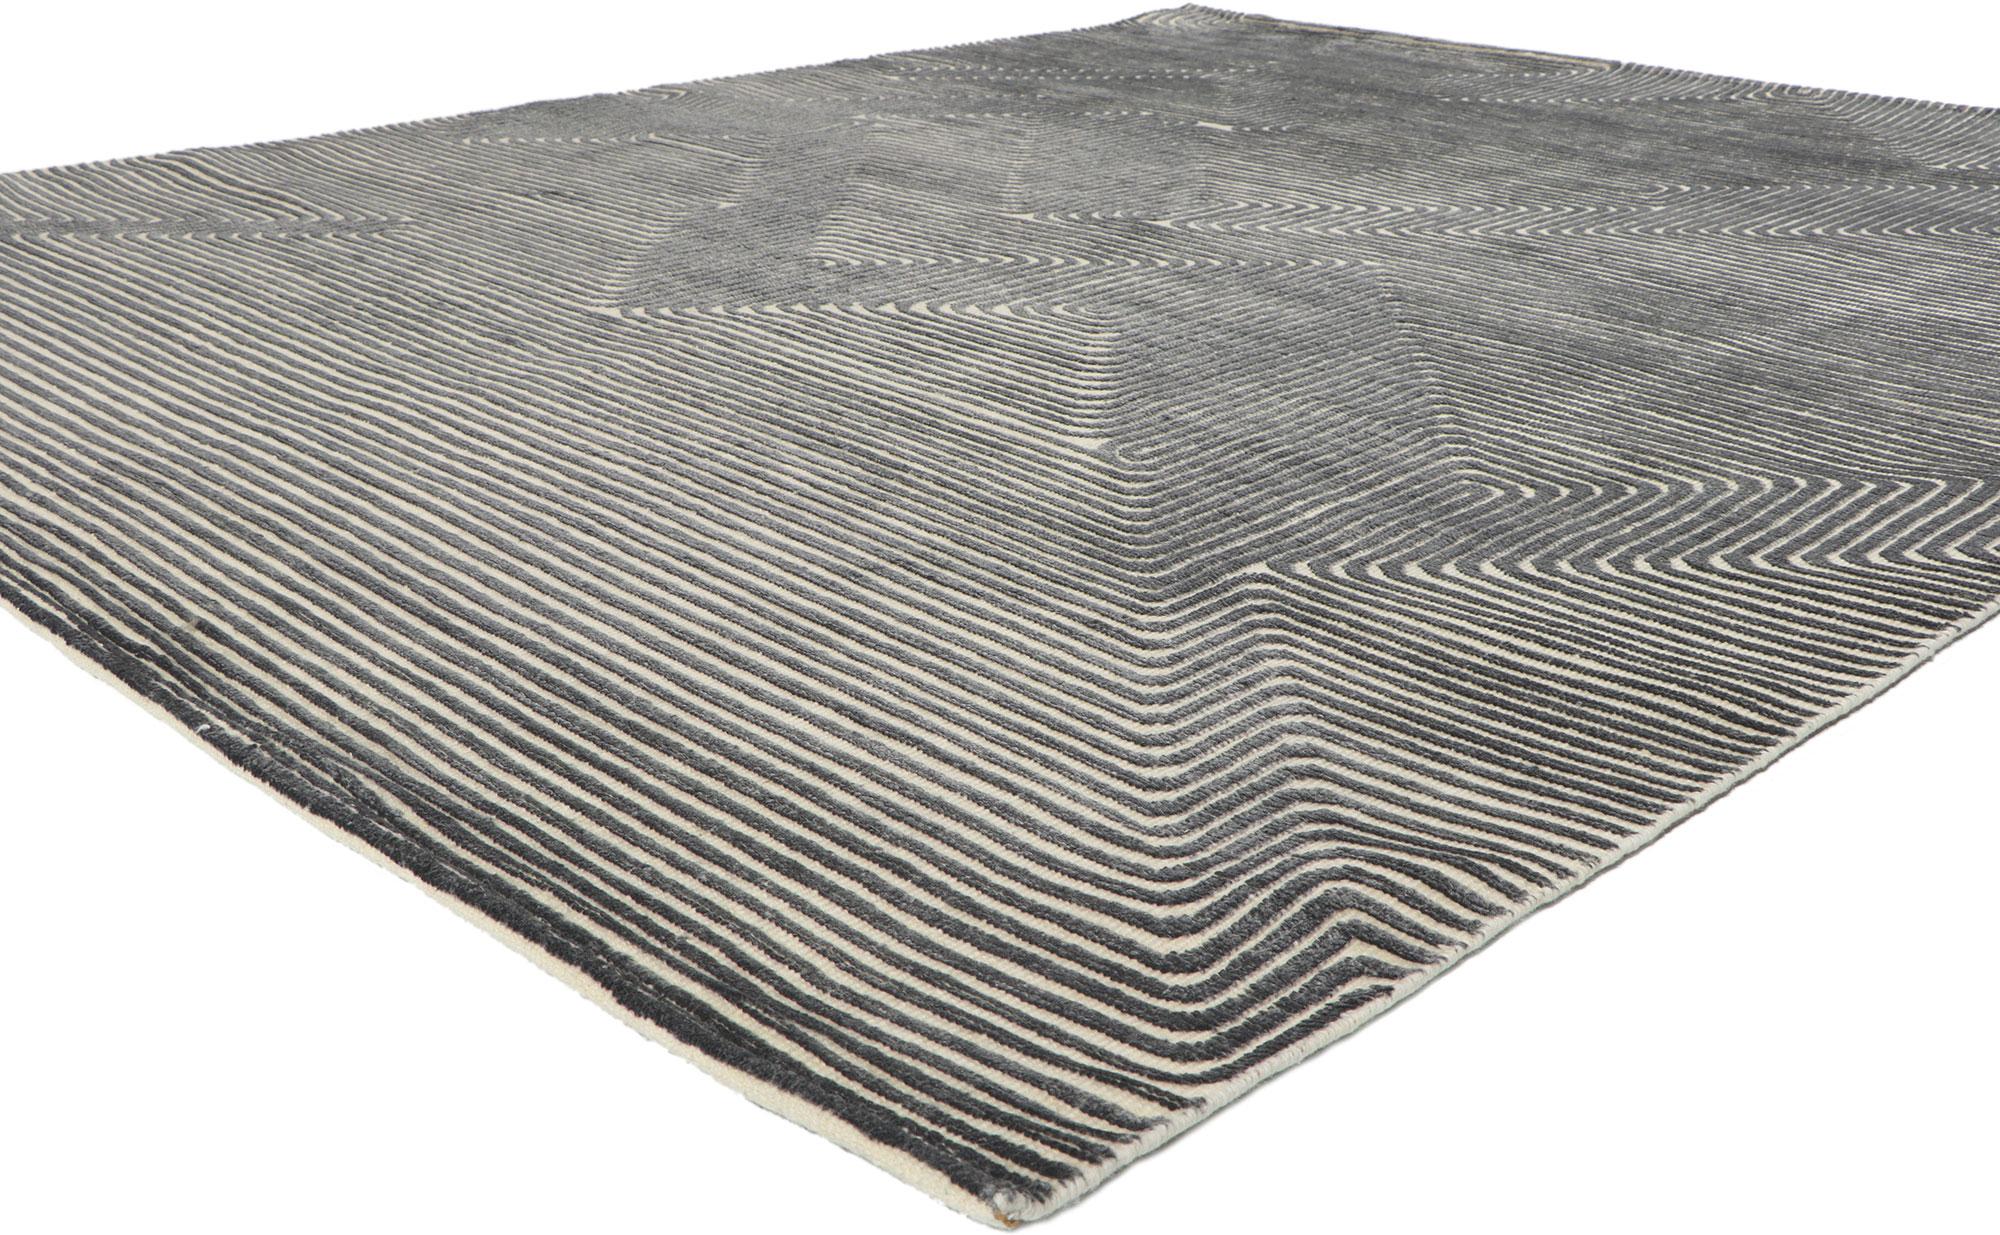 30887 New Contemporary high-low textured rug, 08'01 x 09'10. Reflecting well-balanced asymmetry with incredible detail and texture, this hand-knotted wool contemporary high-low rug is a captivating vision of woven beauty. The eye-catching linear